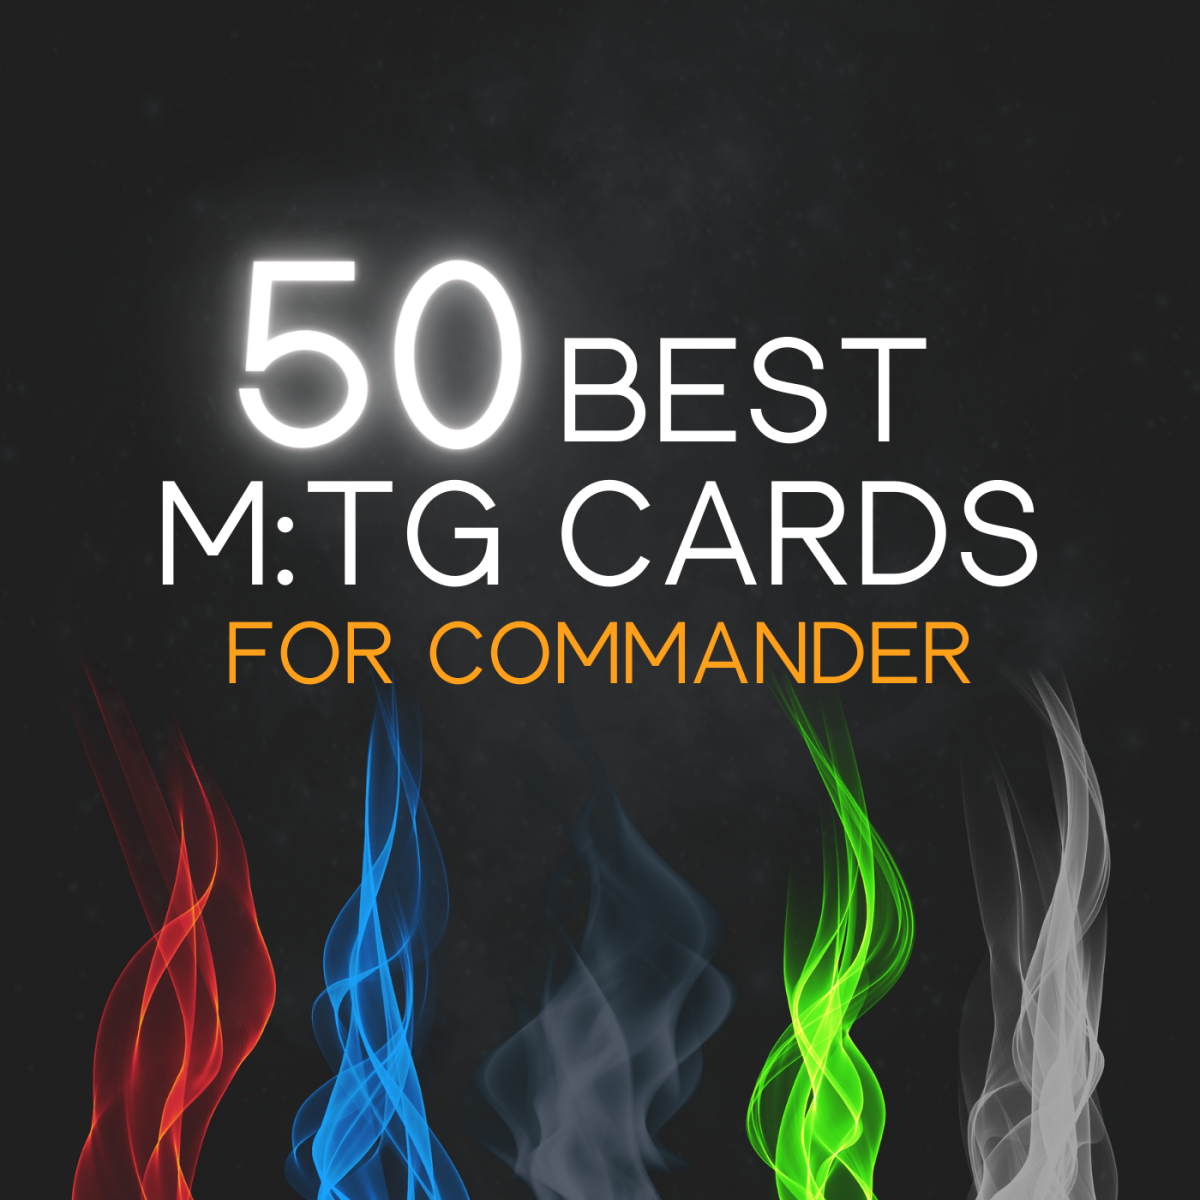 These are my picks for the 50 top Magic: The Gathering cards for the commander format.